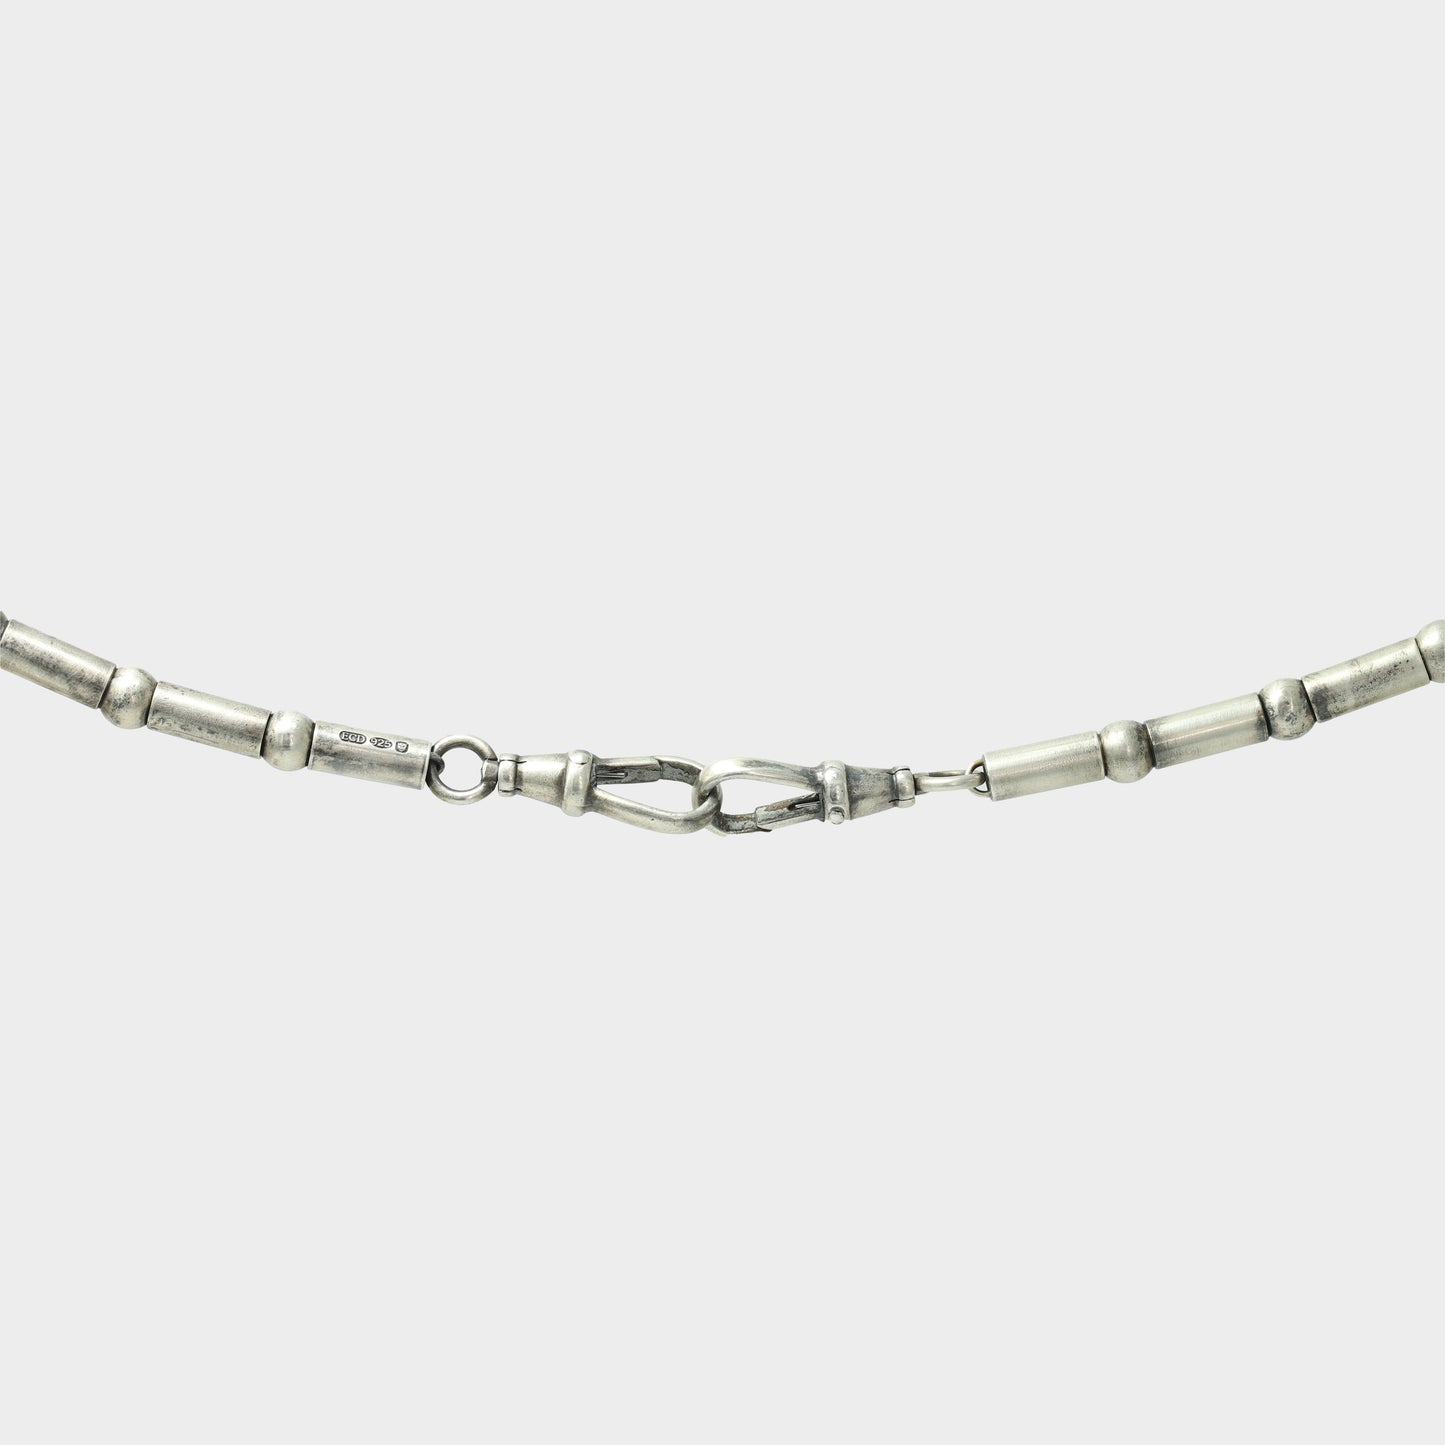 15 Inch Signature Silver Beaded Necklace